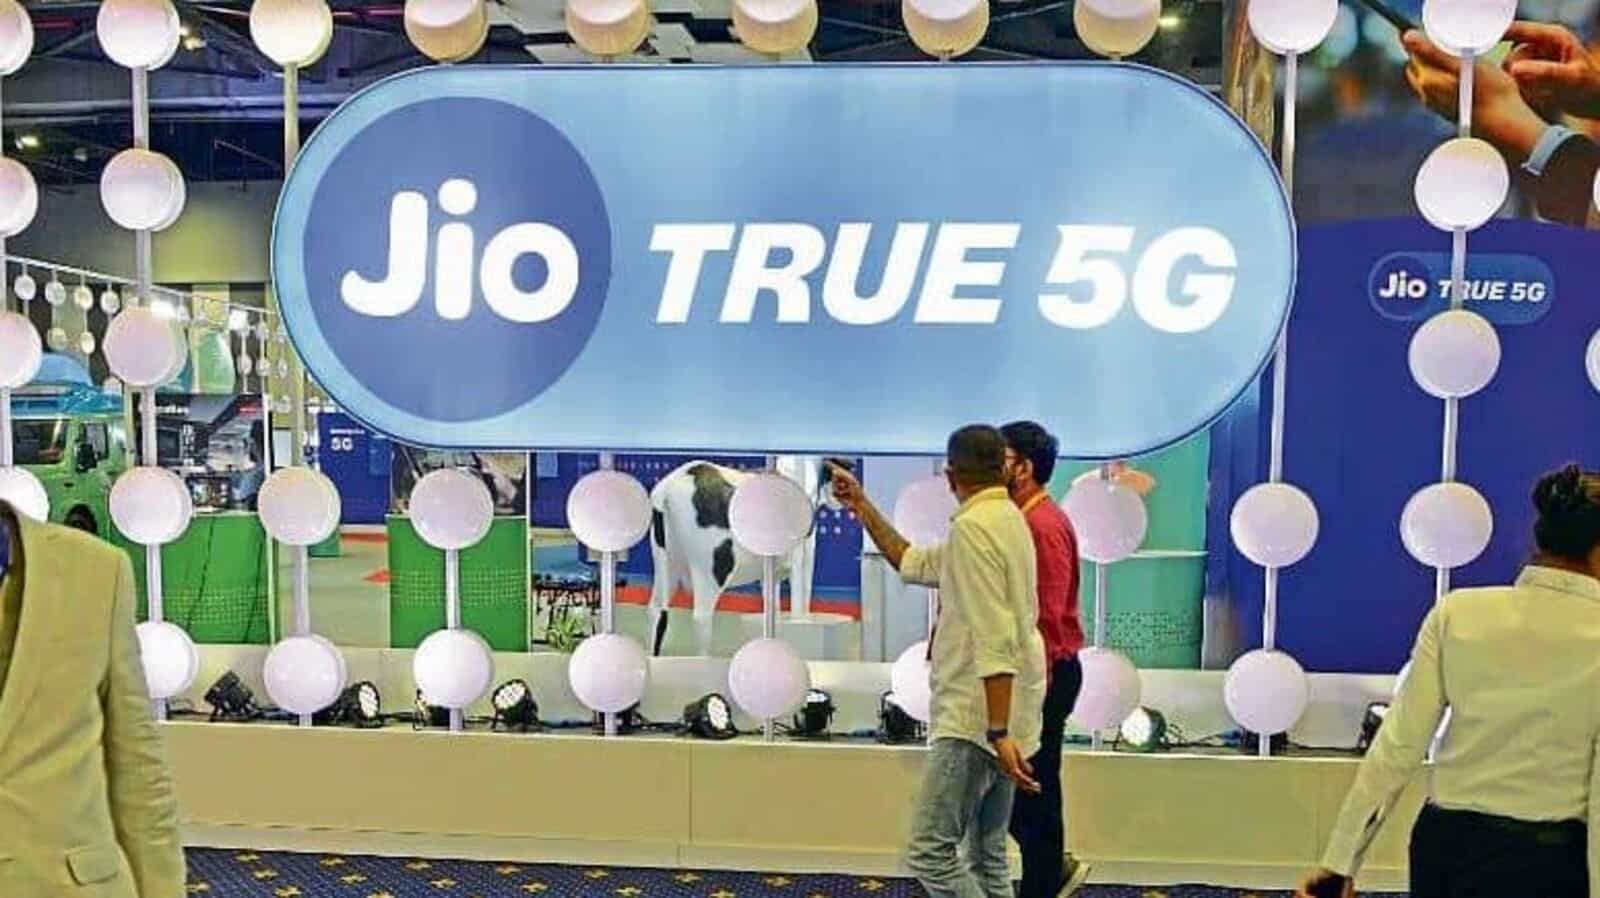 On Dussehra, Reliance launches Jio True 5G in four cities for select customers